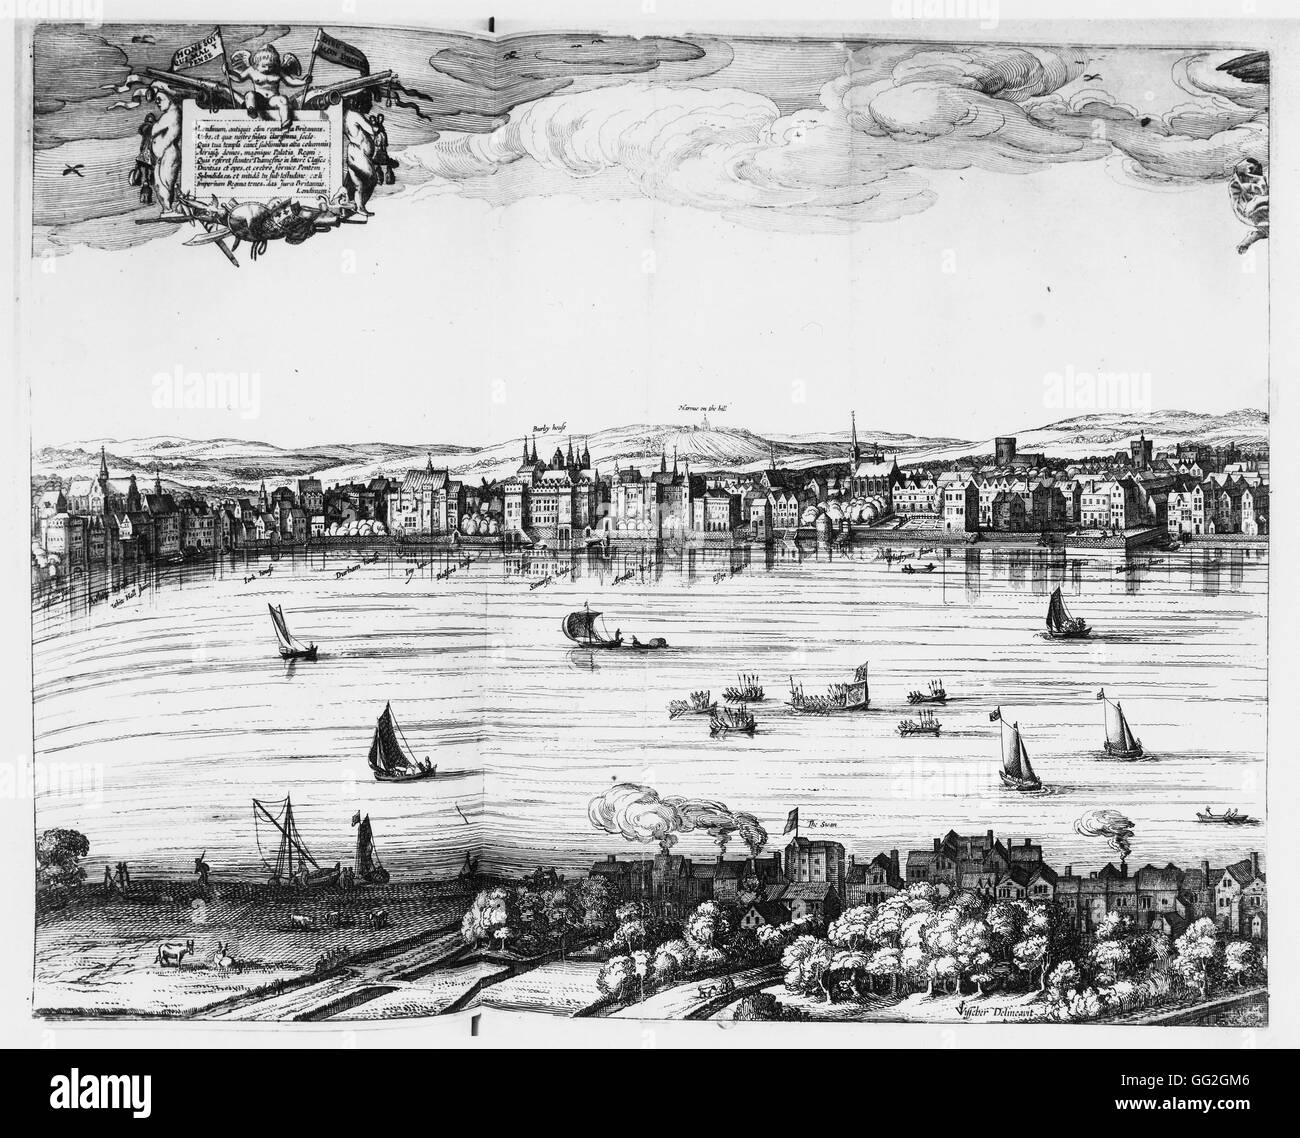 Claes Jansz Visscher Dutch school View of the Thames, the Somerset House and the Swan theatre on the opposite riverbank. Detail from Londinum Florentiss[i]ma Britanniae Urbs, 1616.  Engraving on paper. Paris, Bibliothèque Nationale de France Stock Photo